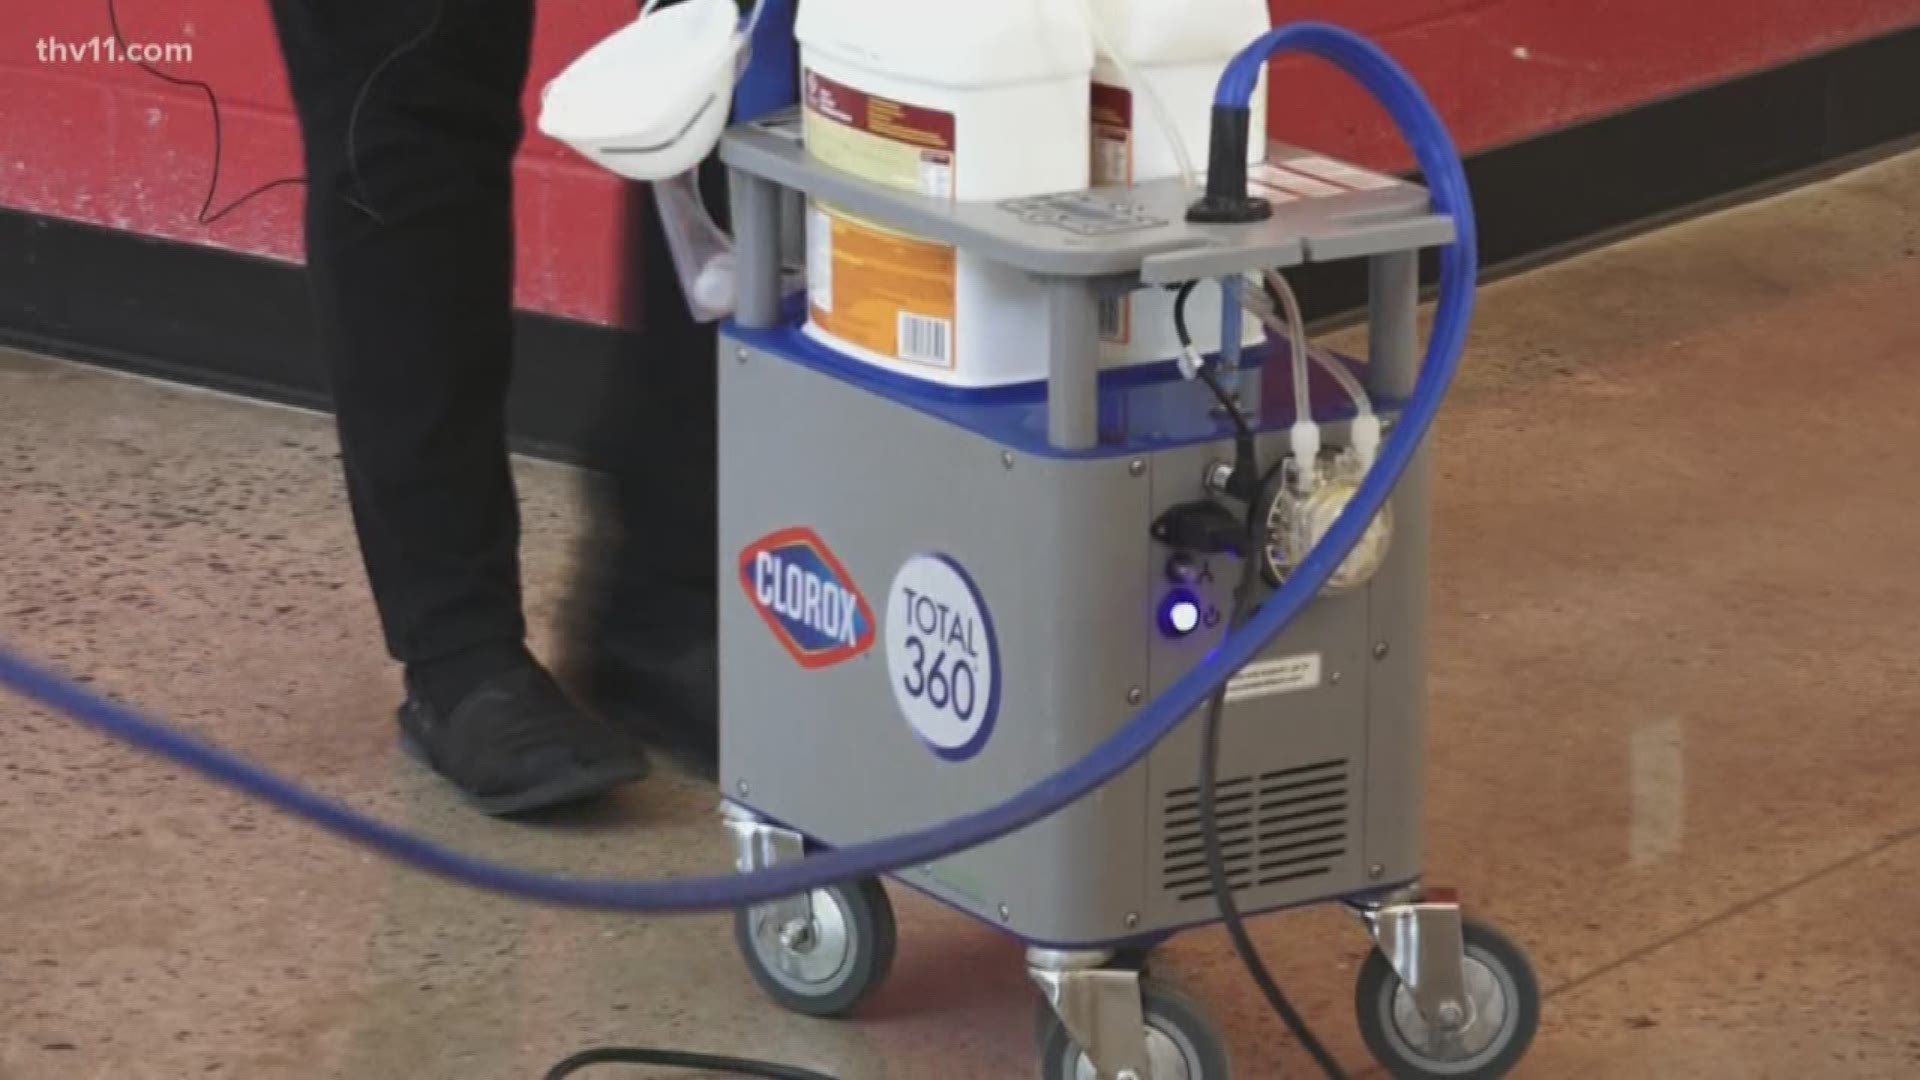 A new cleaning system is deployed in schools with hopes of stopping the flu in its tracks. When the doors closed to students in Maumelle, cleaning crews got to work.